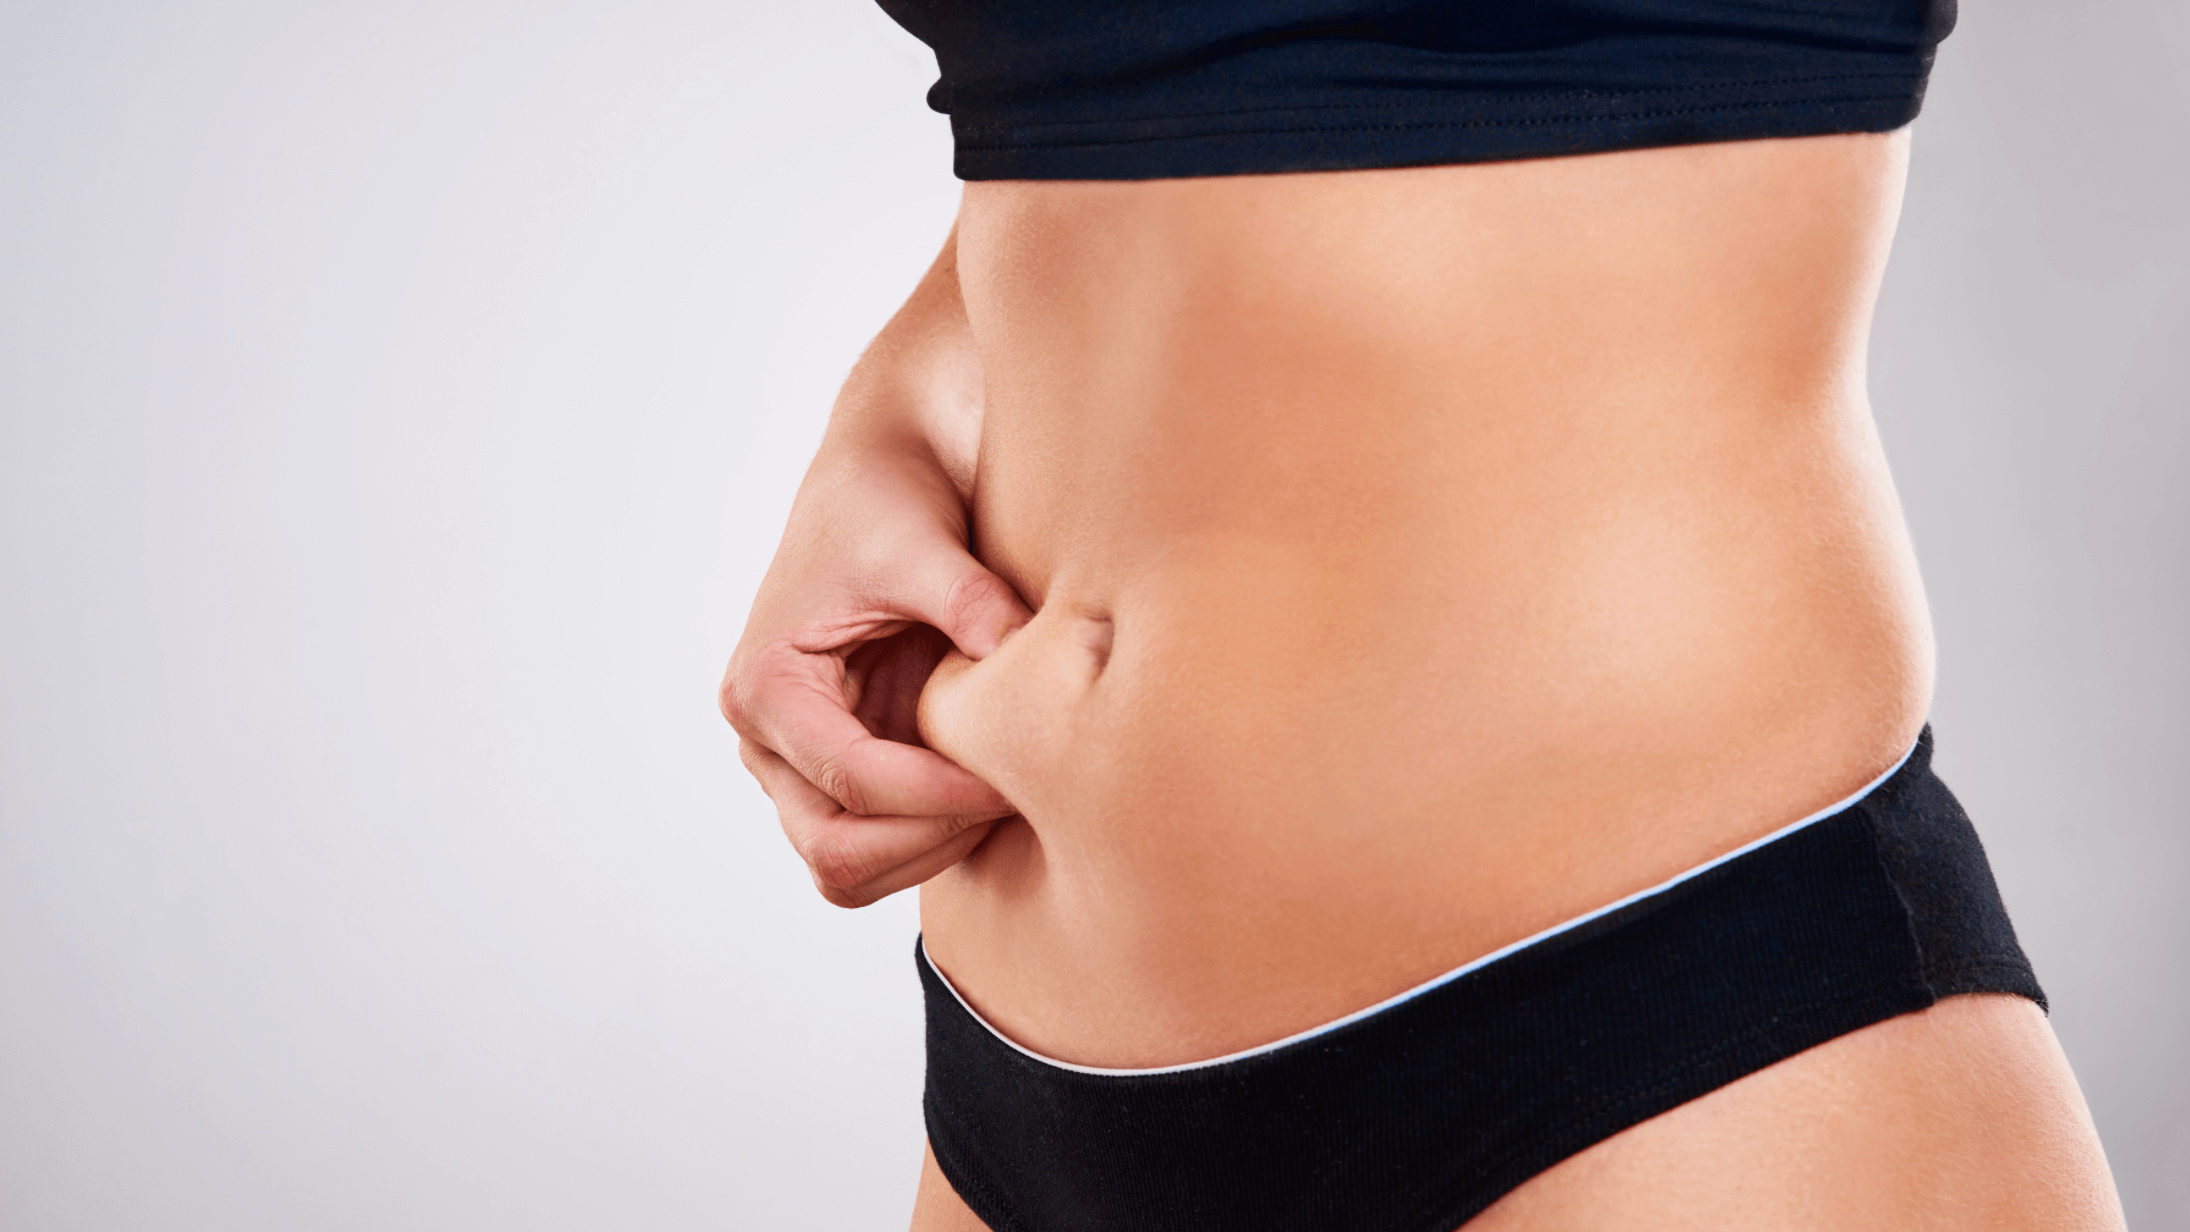 Which Type of Tummy Tuck is Right for You? - Dr. Hess